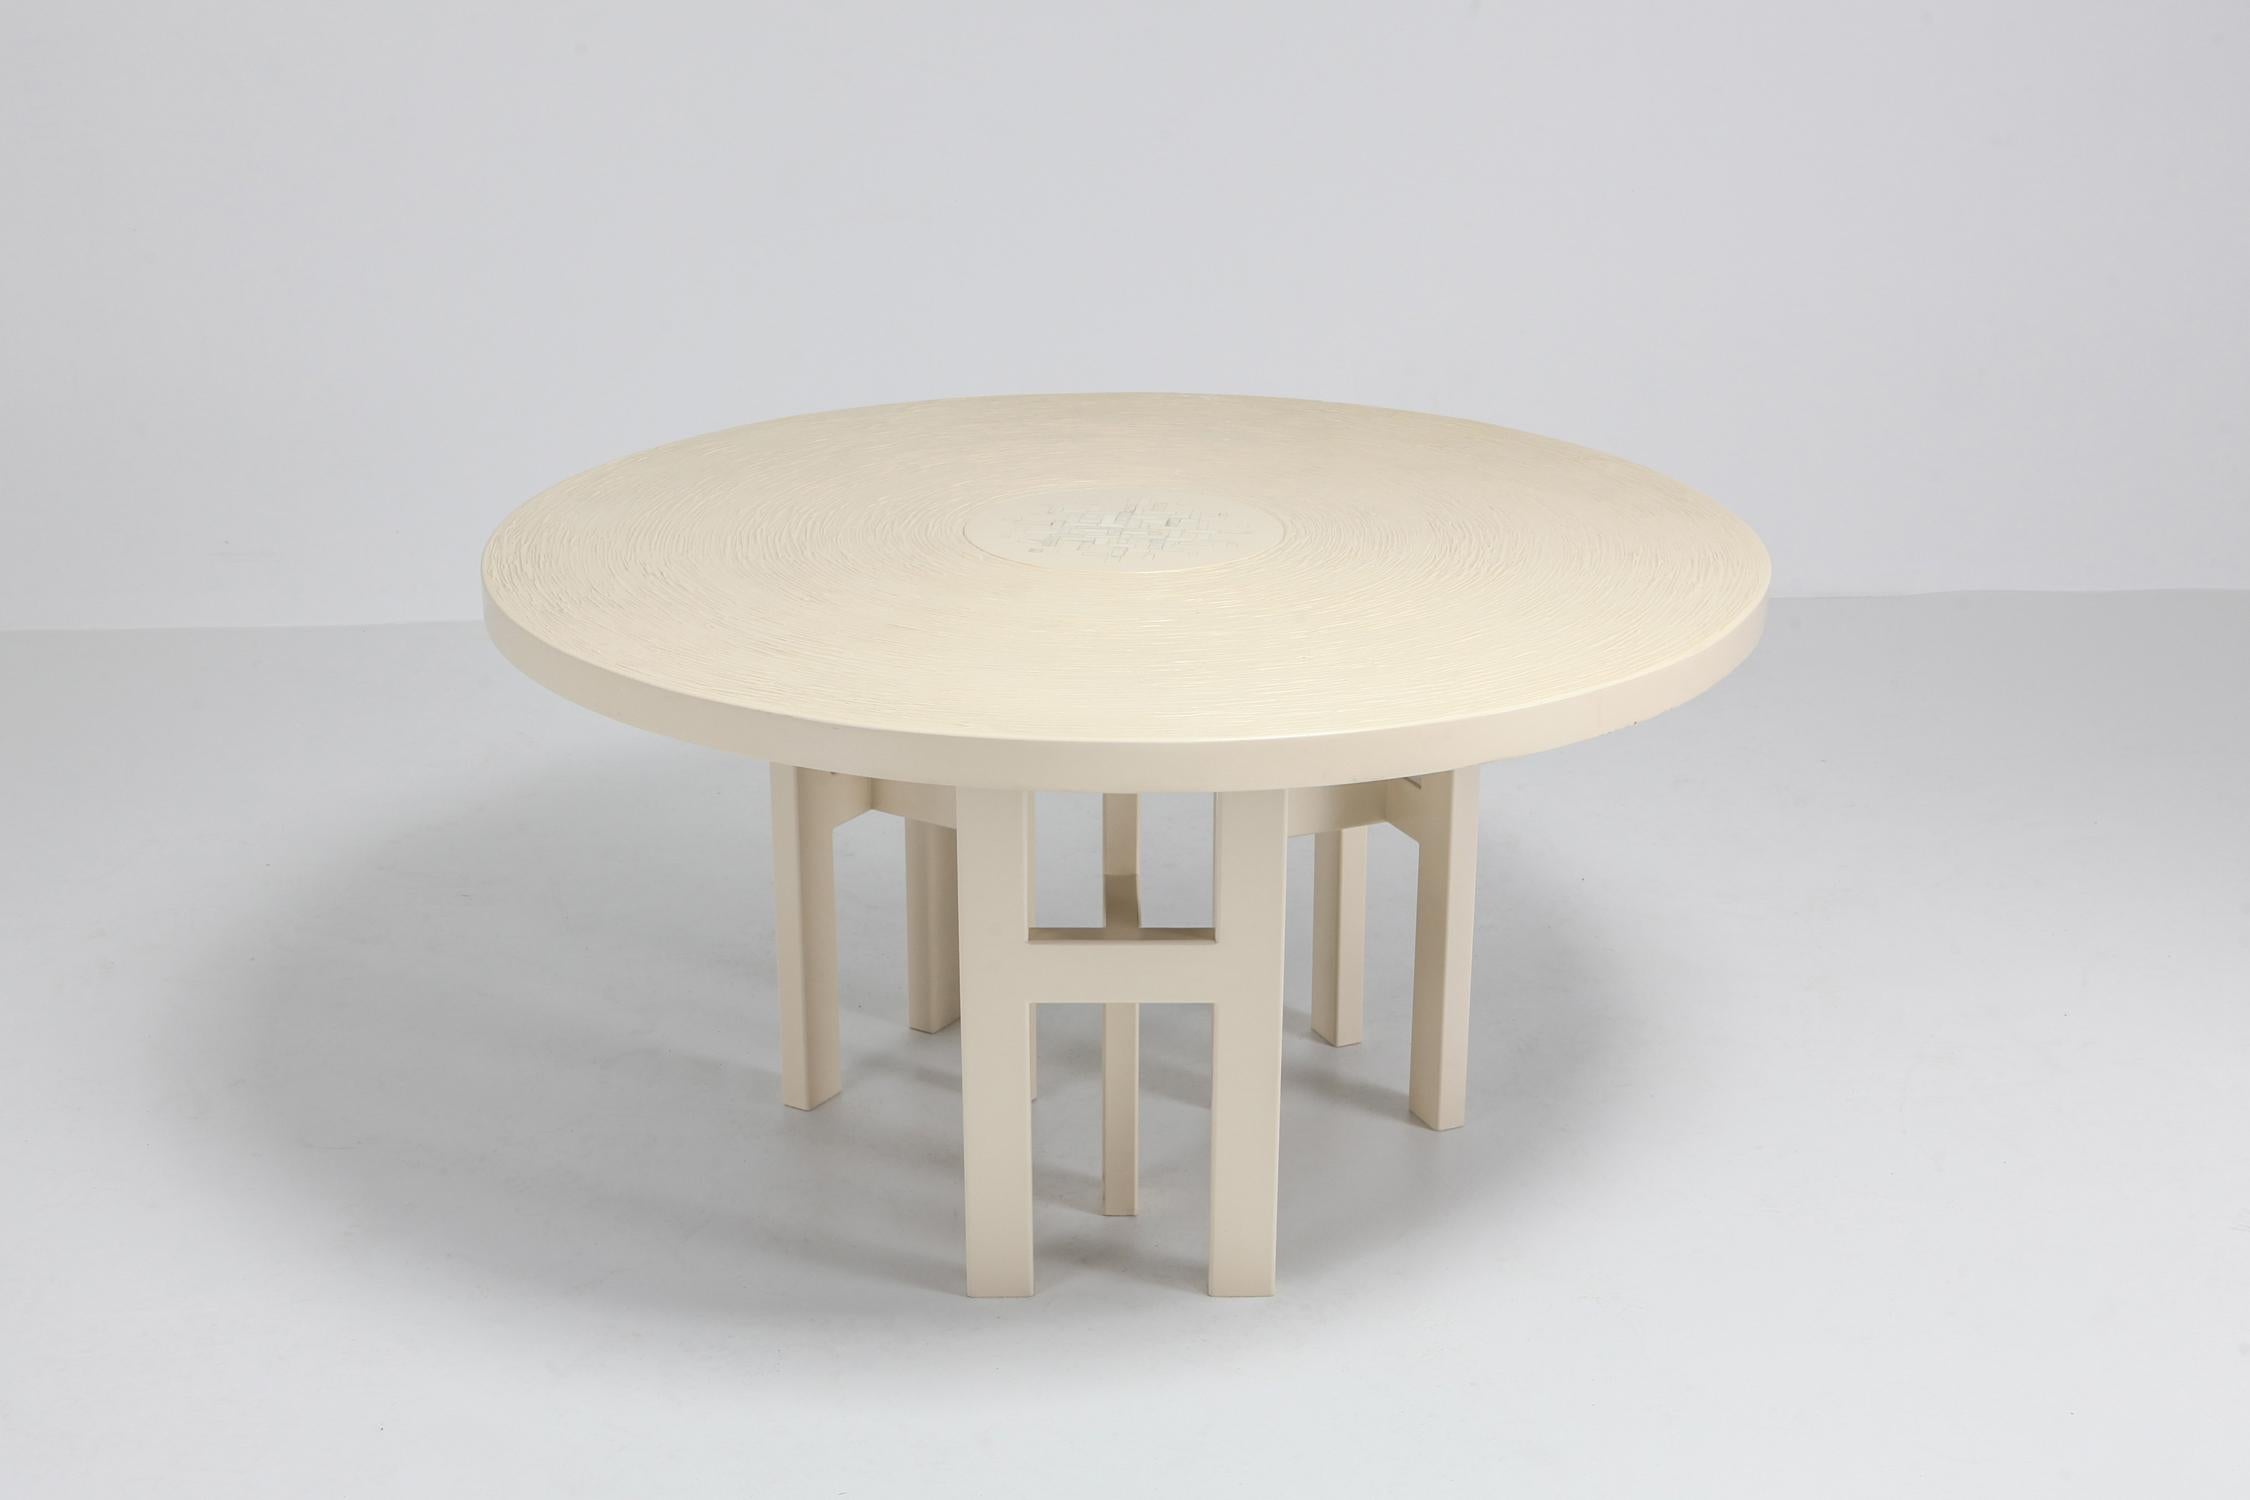 European Jean Claude Dresse Exceptional Resin Dining Table